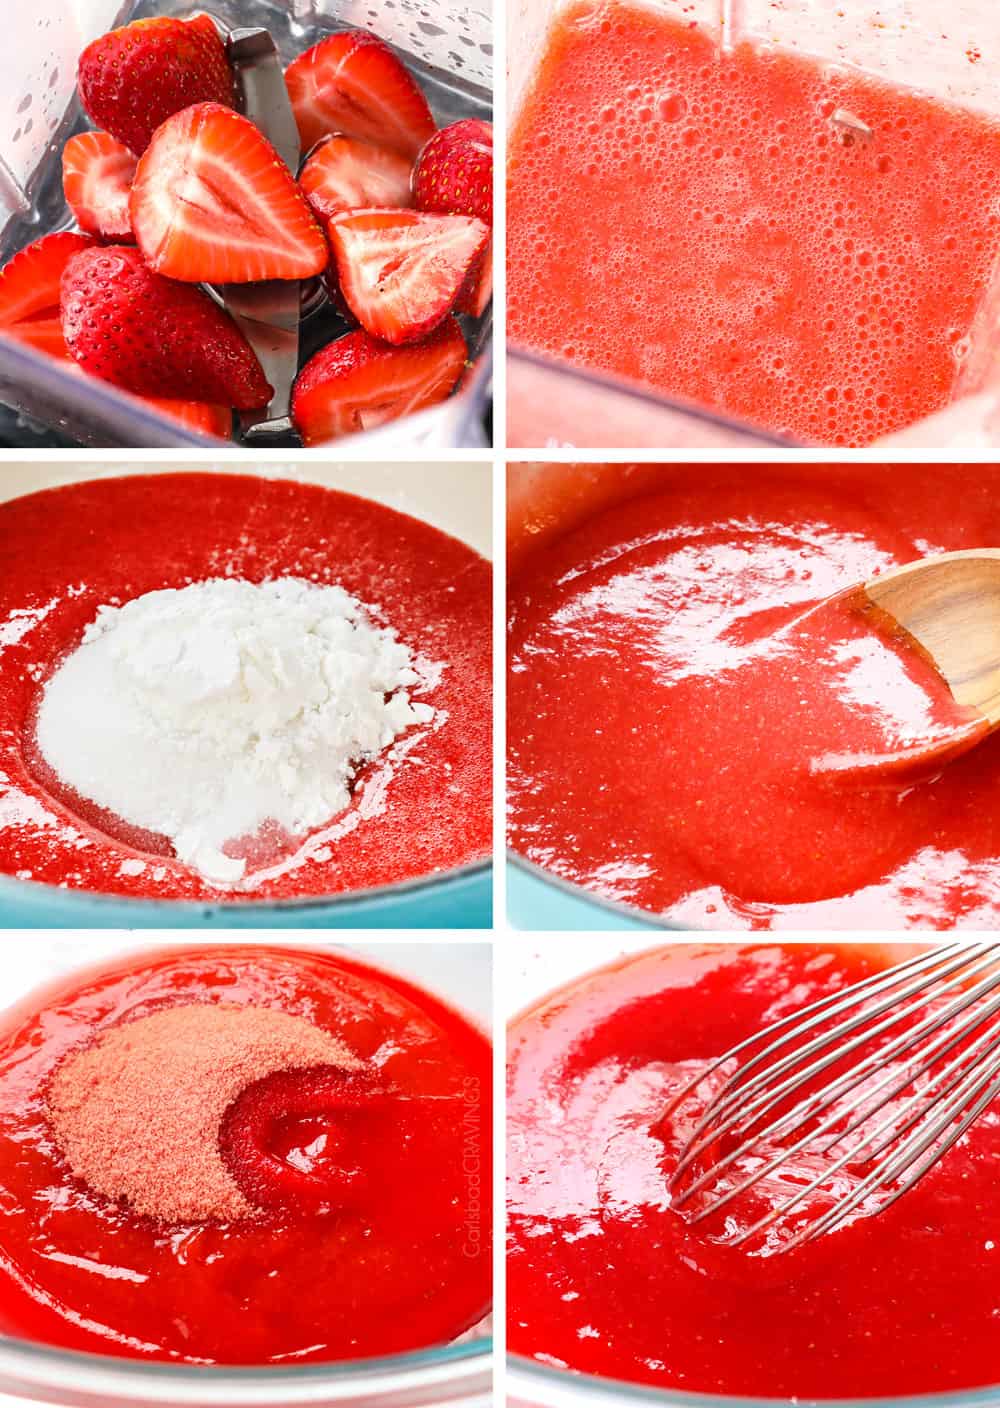 a collage showing how to make strawberry topping for cheesecake by 1) pureeing strawberries in a blender, adding puree to saucepan with sugar and cornstarch, simmering until thickened, adding to a bowl with strawberry Jell-0